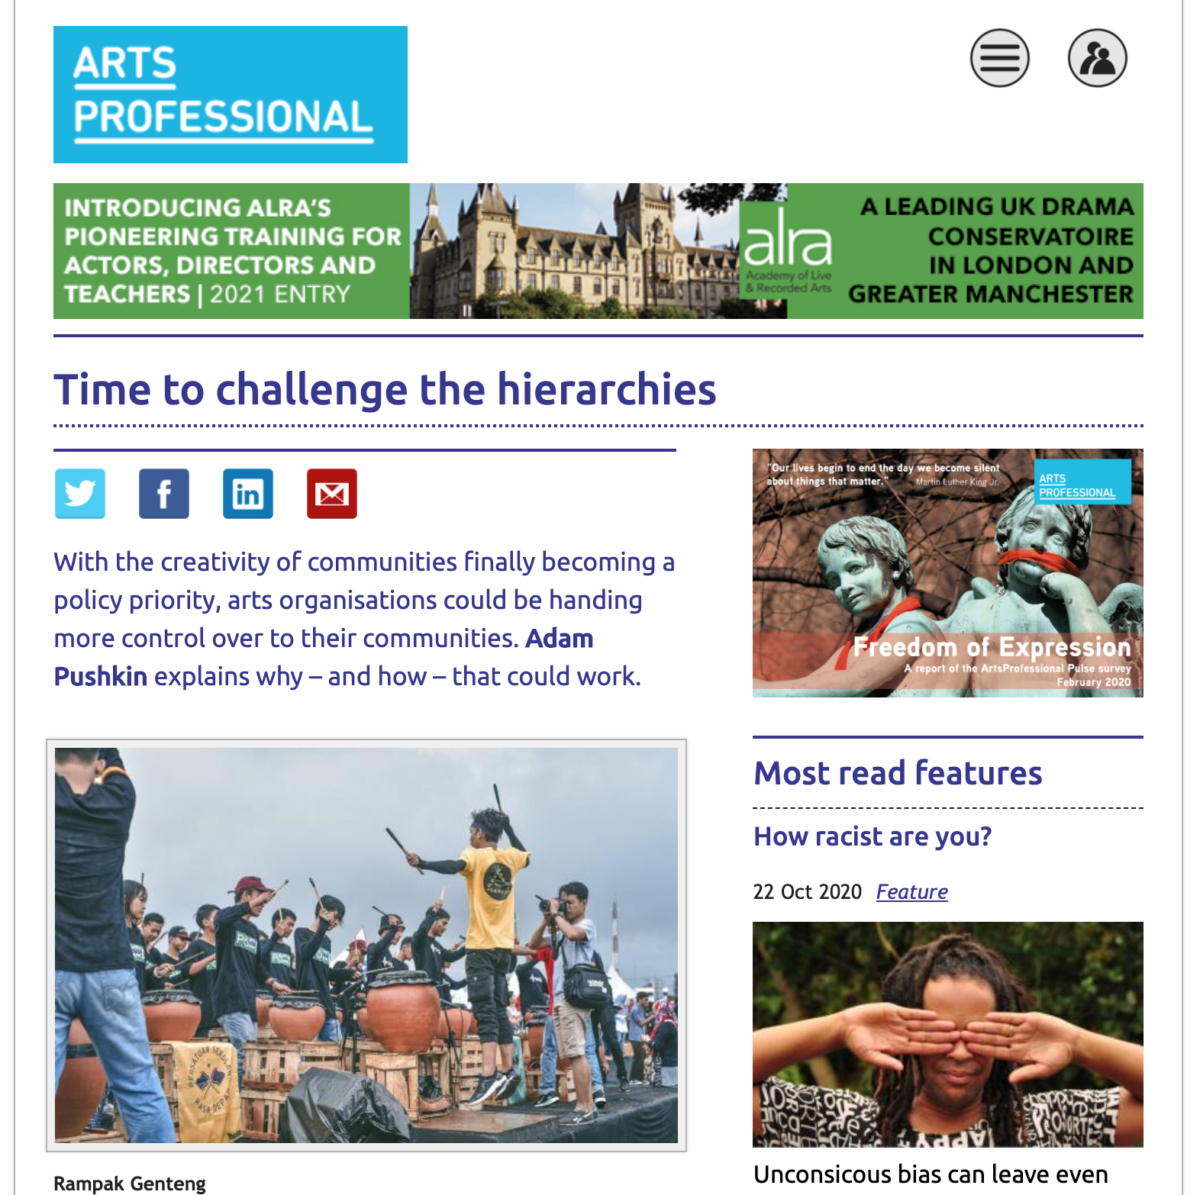 Time to challenge the hierarchies, WJWY in Arts Professional, Sept 2020